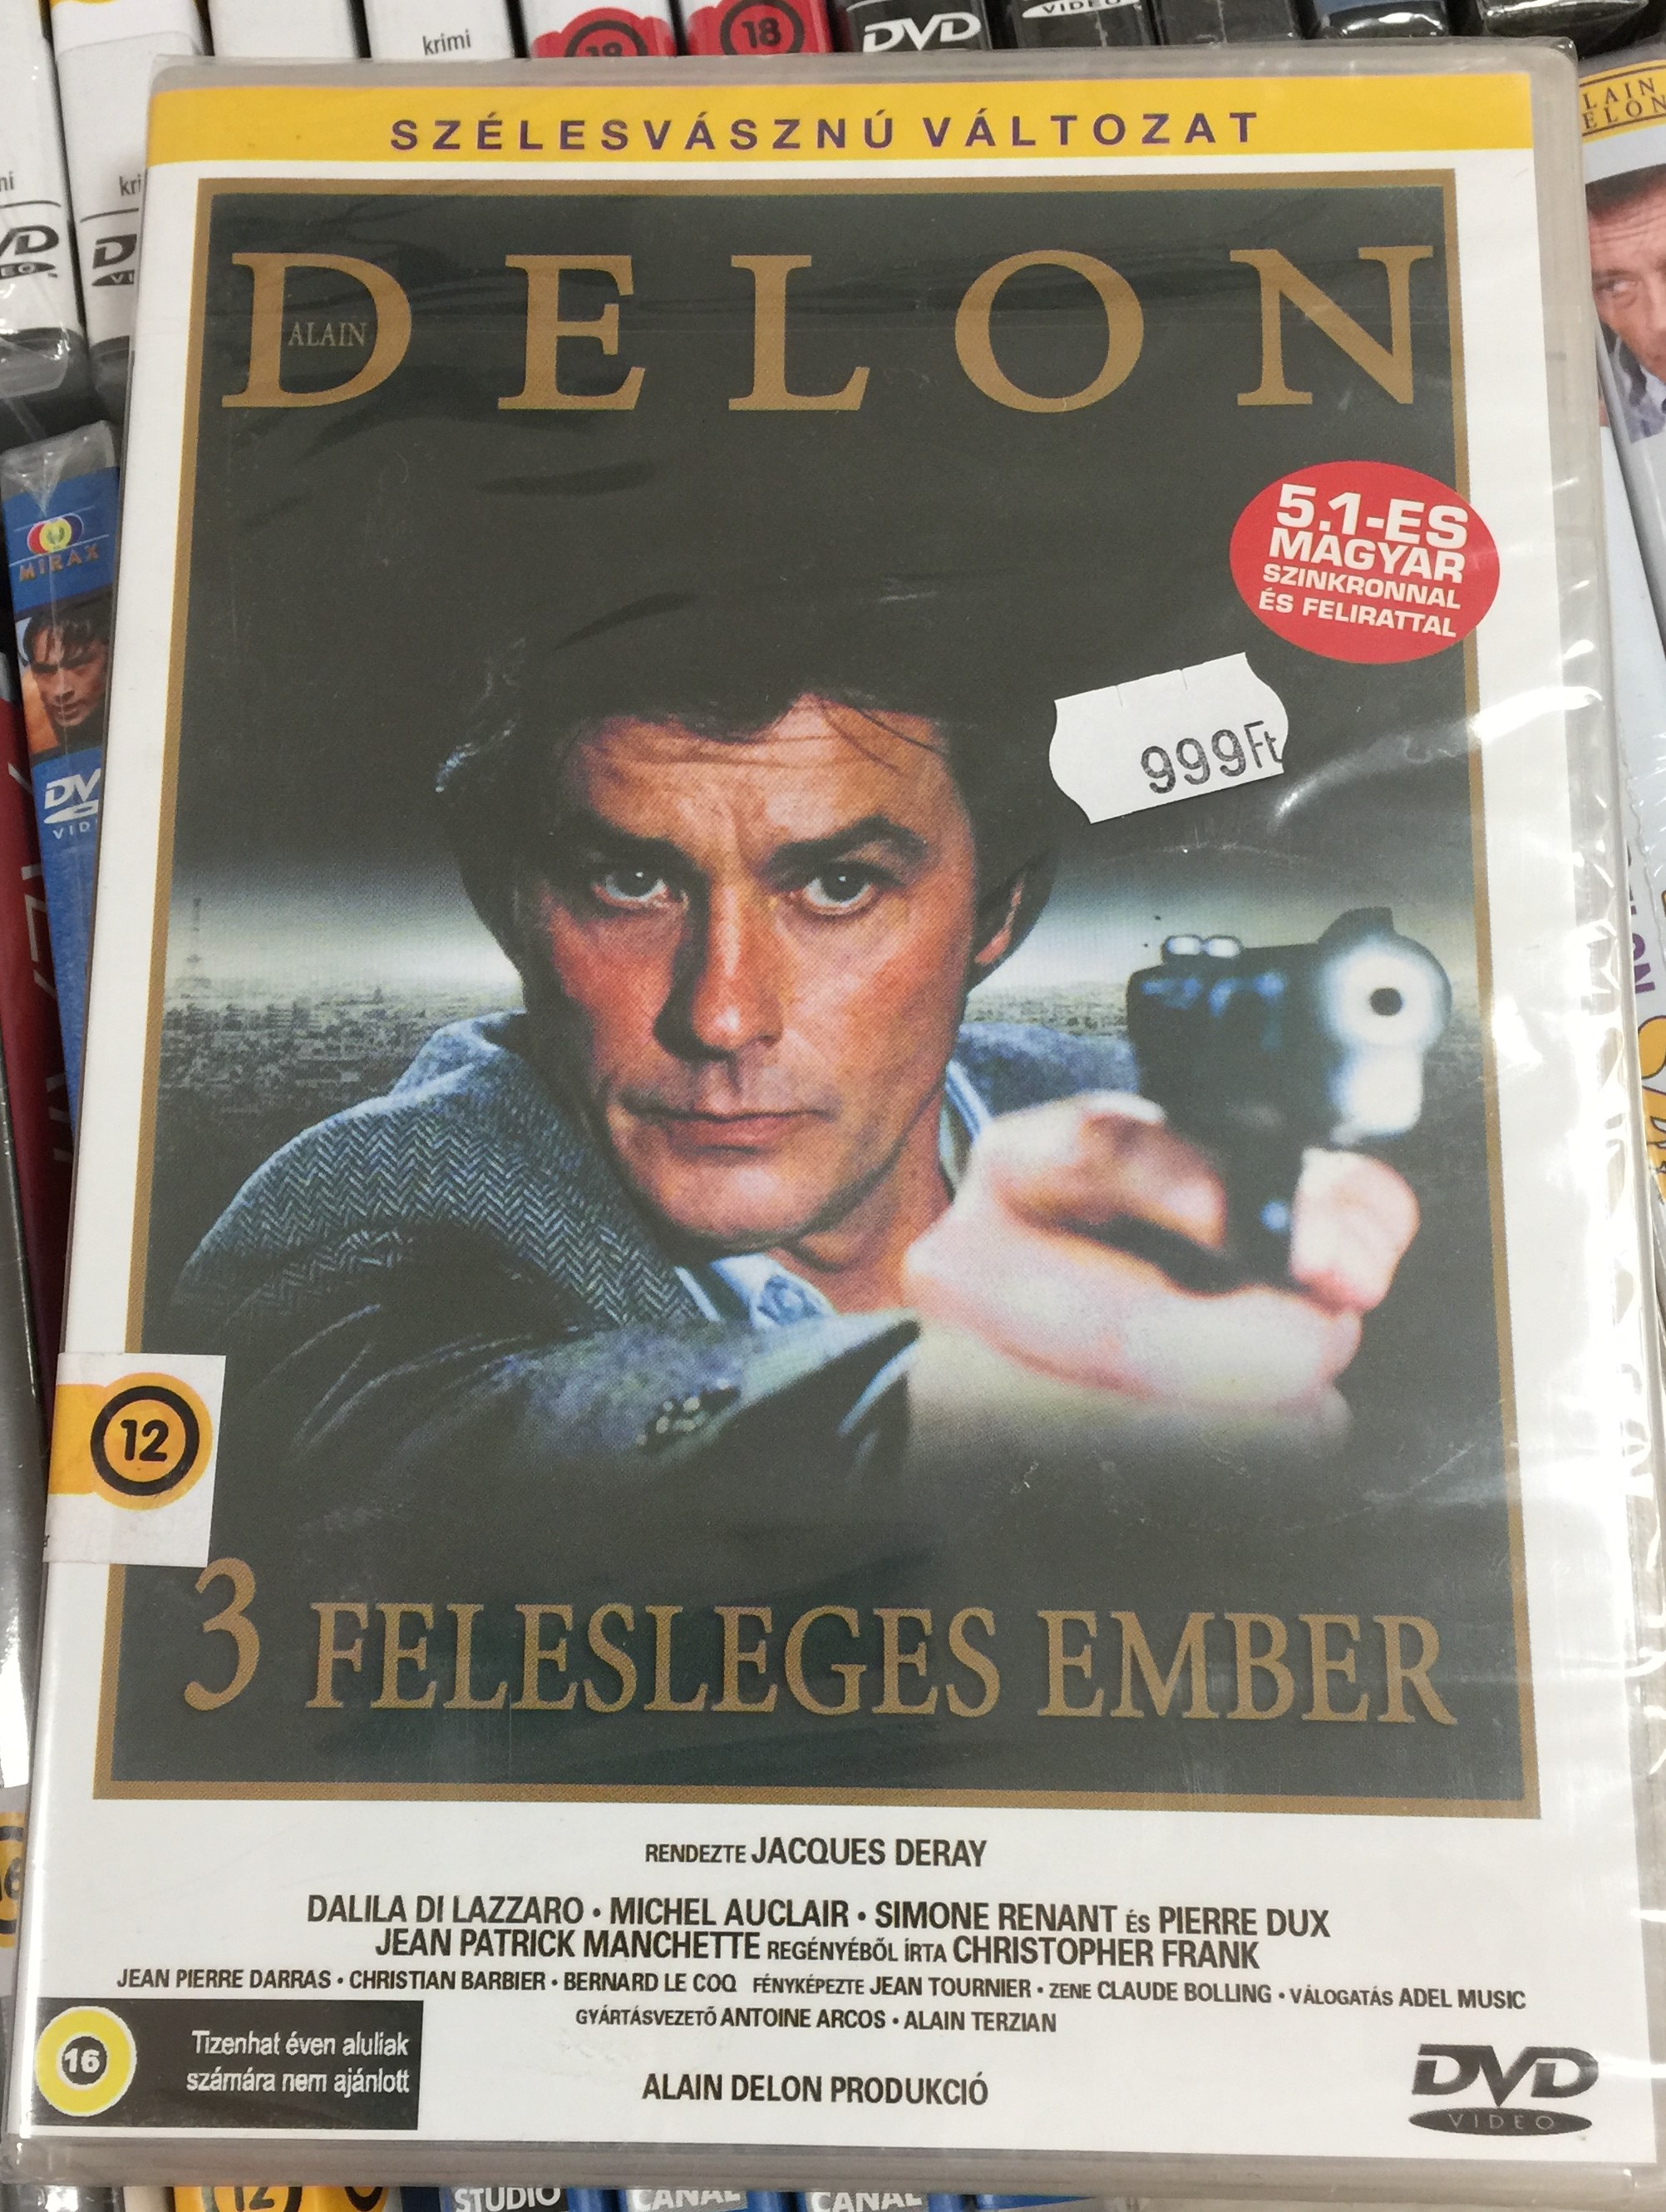 Trois Hommes a Abattre DVD 1979 Három felesleges ember / Directed by  Jacques Deray / Starring: Alain Delon, Dalila Di Lazzaro / Three Men to  Kill - bibleinmylanguage